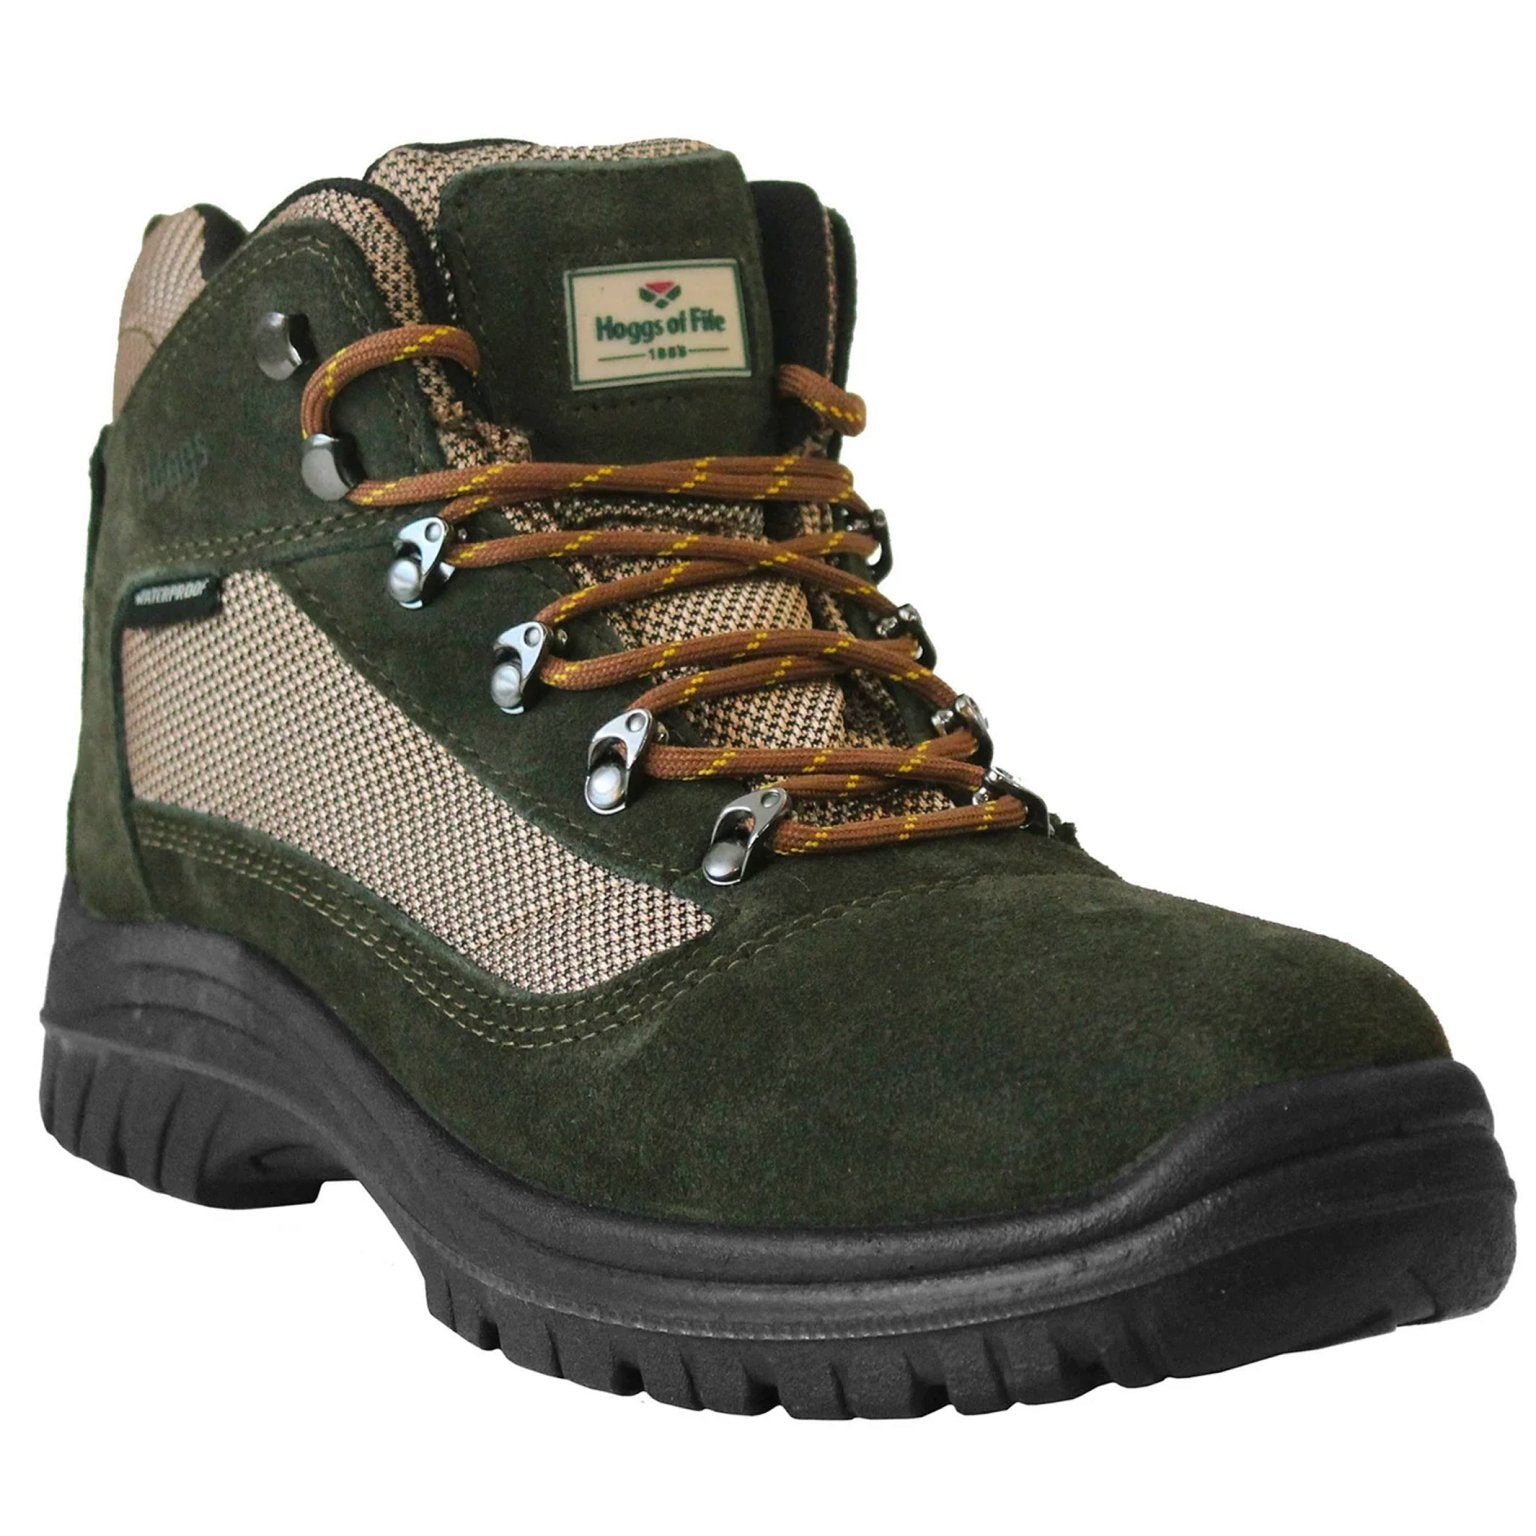 4elementsclothingHoggs of FifeHoggs of Fife - Rambler Waterproof boots, Hiking boot, Lightweight breathable bootsBootsRAMB/GR/040